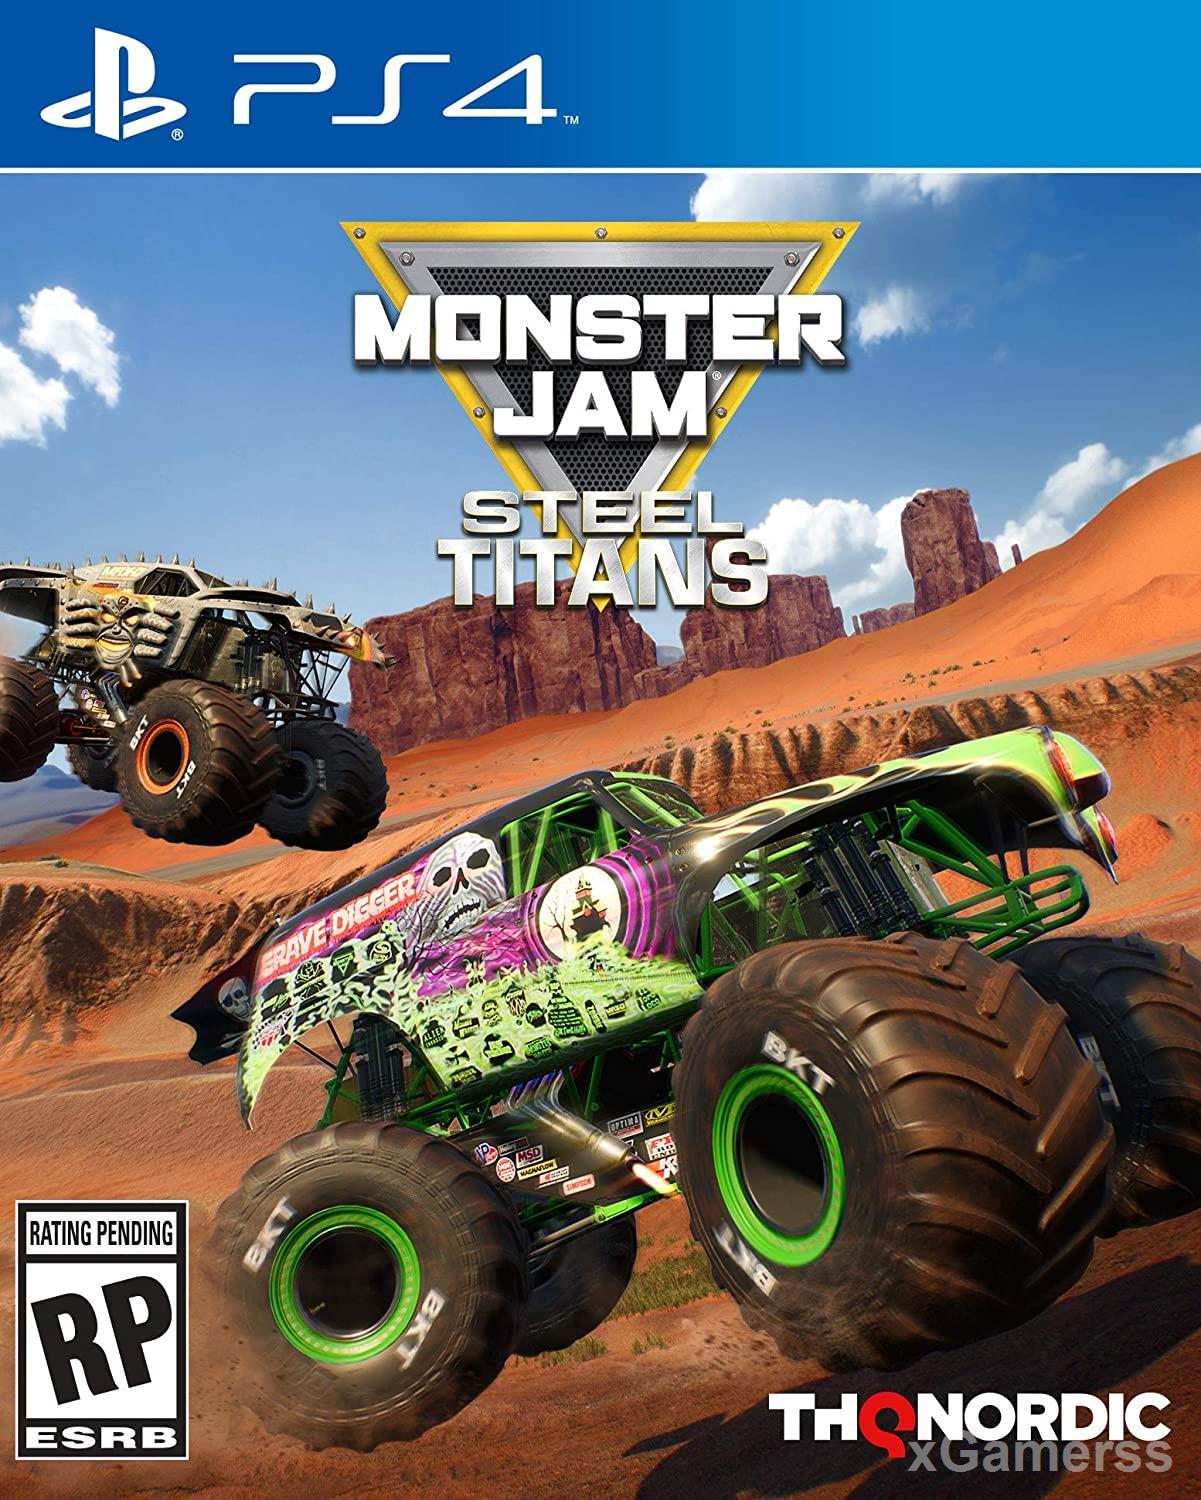 Monster Jam: Steel Titans - there are different challenges and adventures